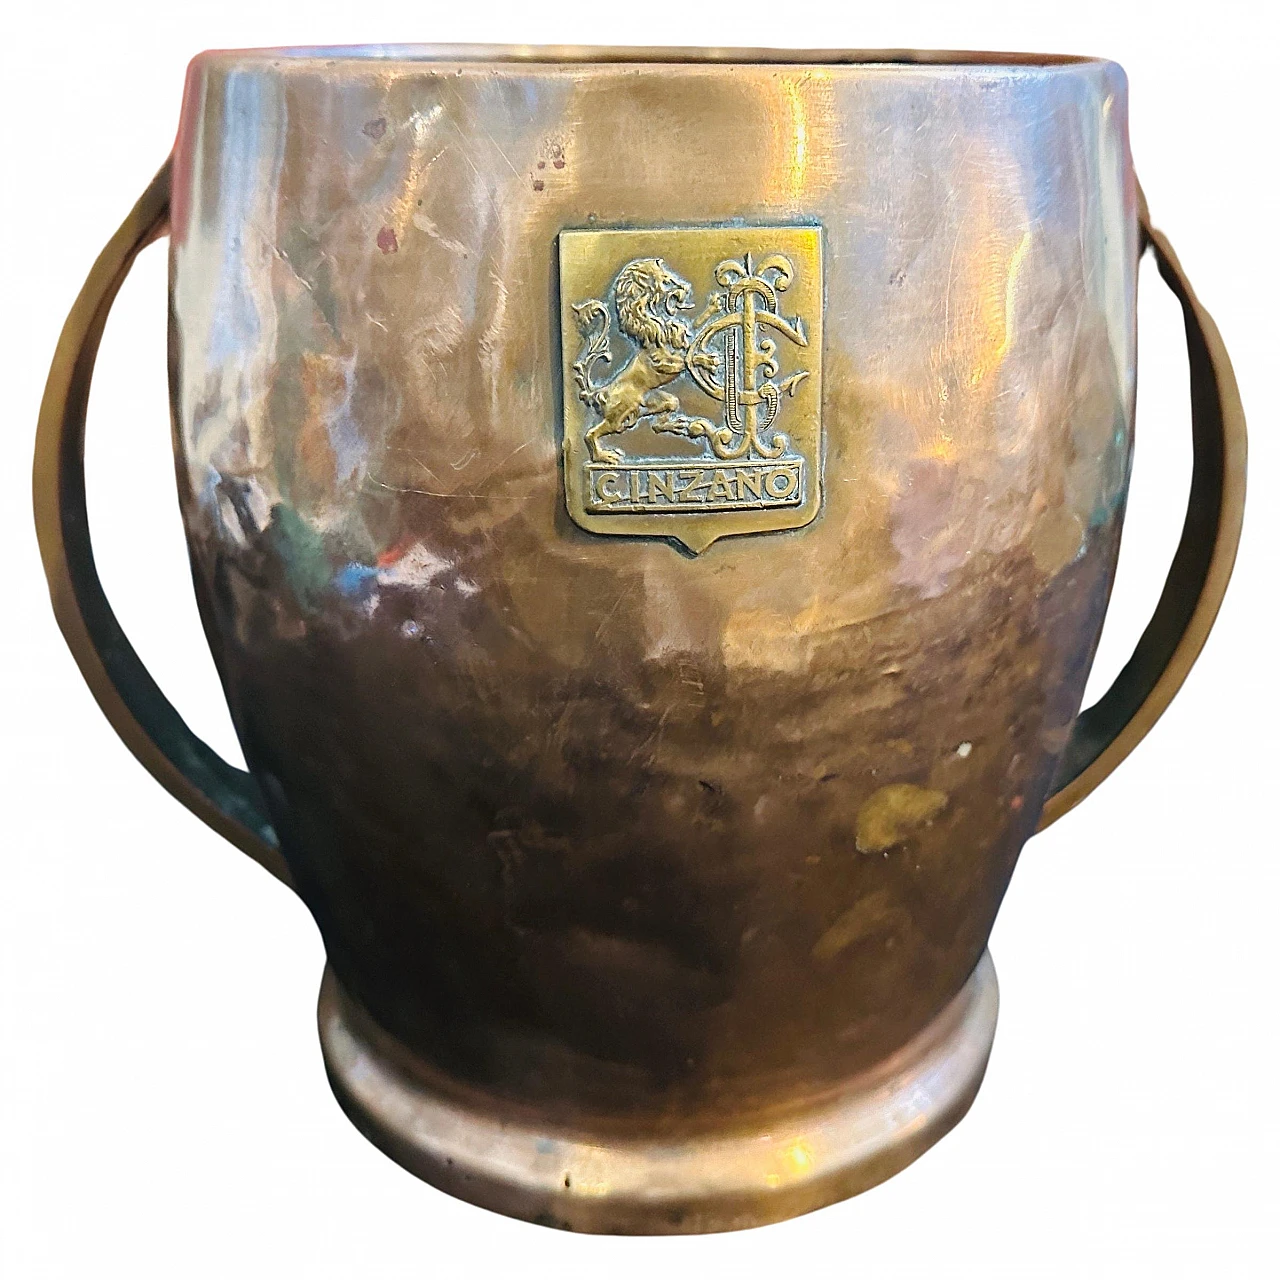 Copper and hammered brass ice bucket by Cinzano, 1940s 1